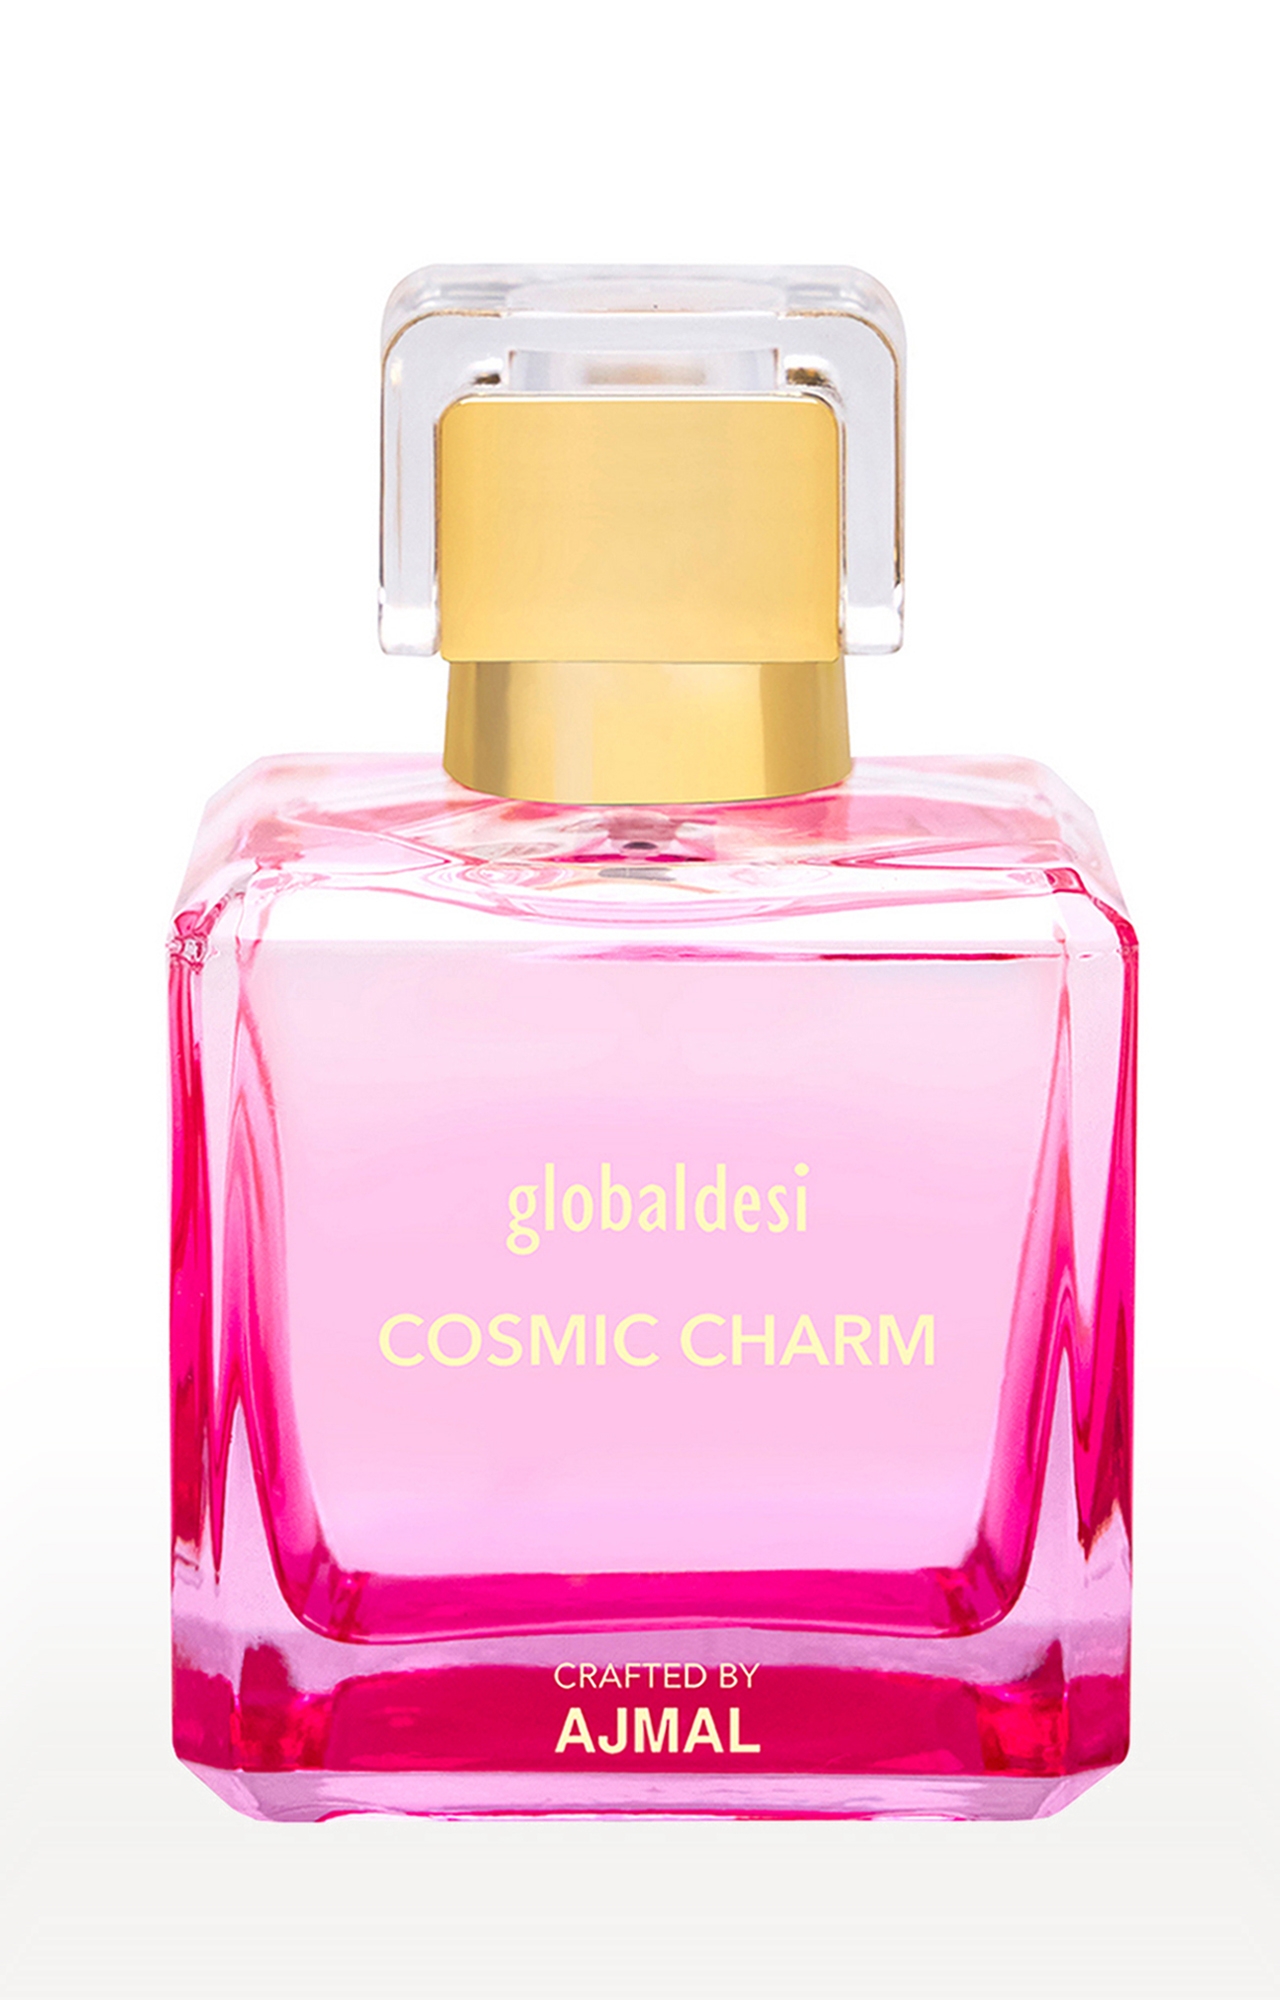 Global Desi Crafted By Ajmal | Global Desi Cosmic Charm Eau De Parfum 50ML Long Lasting Scent Spray Gift For Women Crafted By Ajmal 1